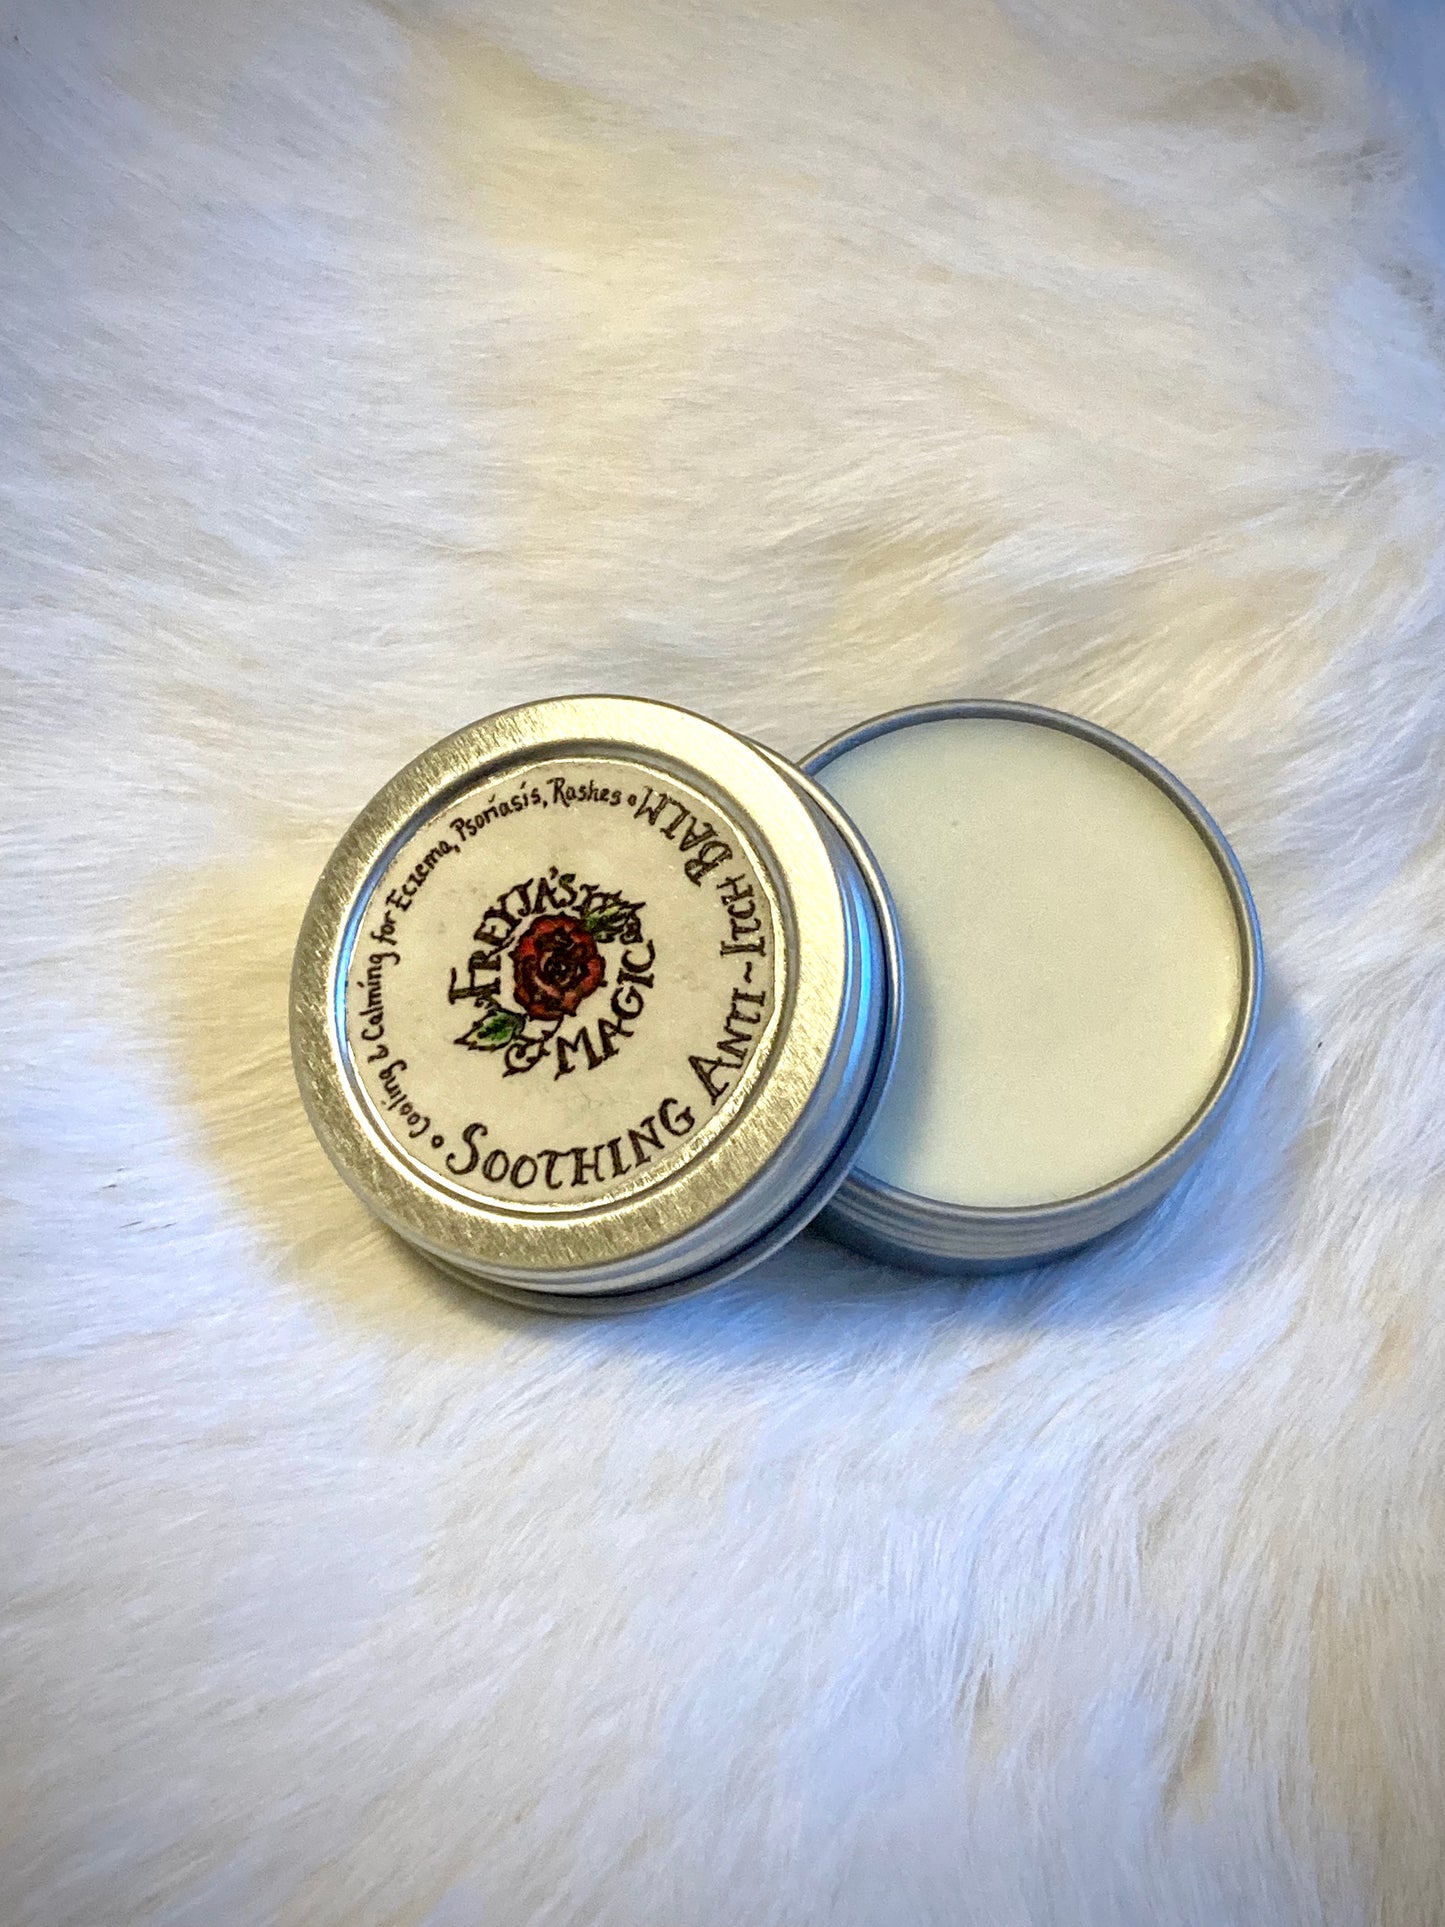 Soothing Anti-Itch Balm | Cooling, Calming for Eczema, Psoriasis, Rashes, Inflammation, Irritation | Peppermint, Lavender & Chamomile